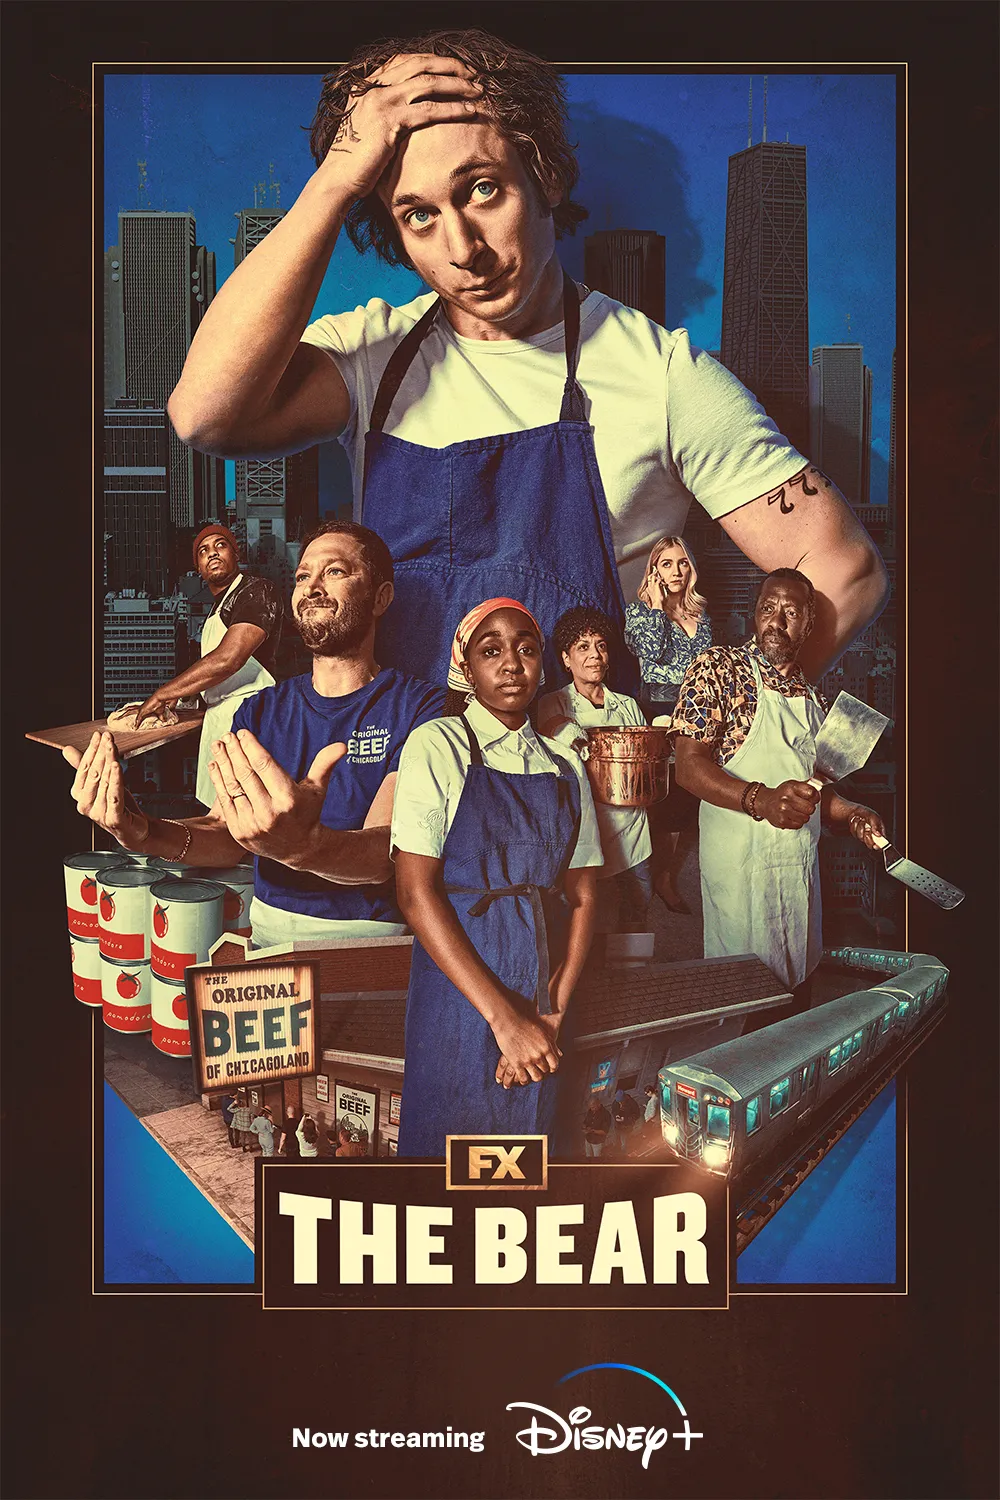 The Bear Season 2 on Disney+ TV show poster: Carmy must balance his newfound success with the demands of his family, his newfound friends, and his own demons.